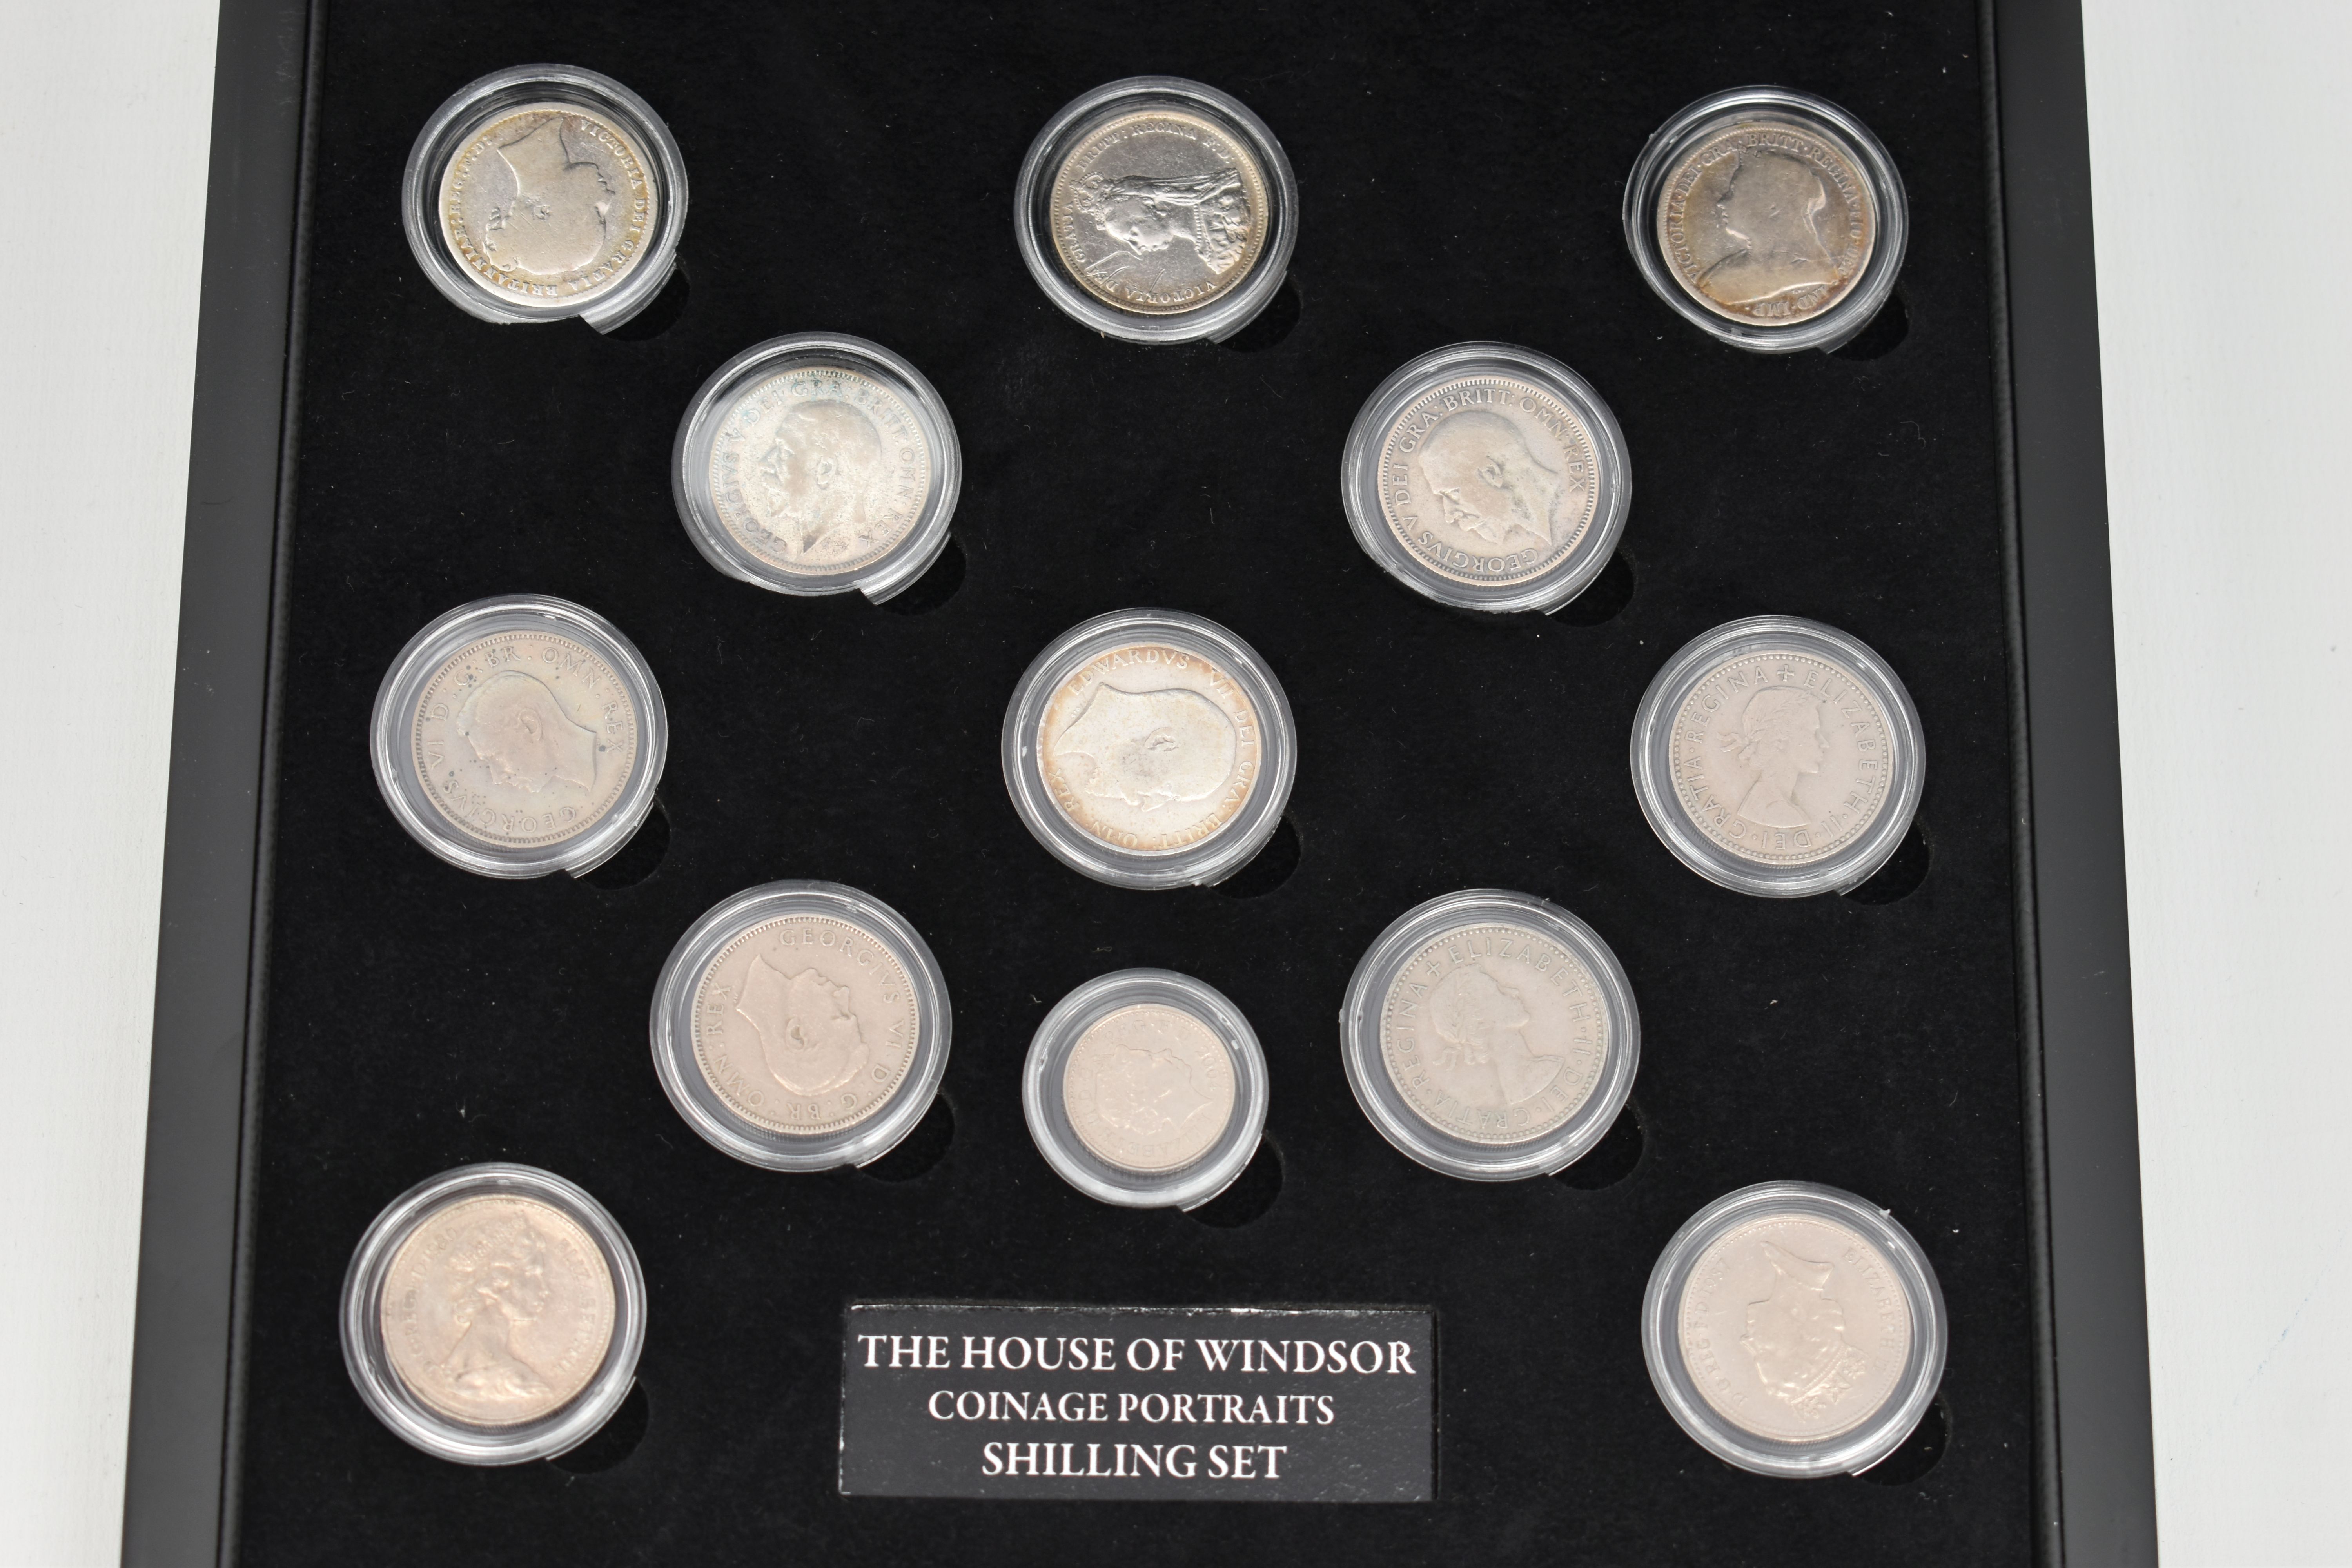 A CASED SET OF COMMEMORATIVE COINS, The House of Windsor coinage portraits shilling set by The - Image 2 of 6